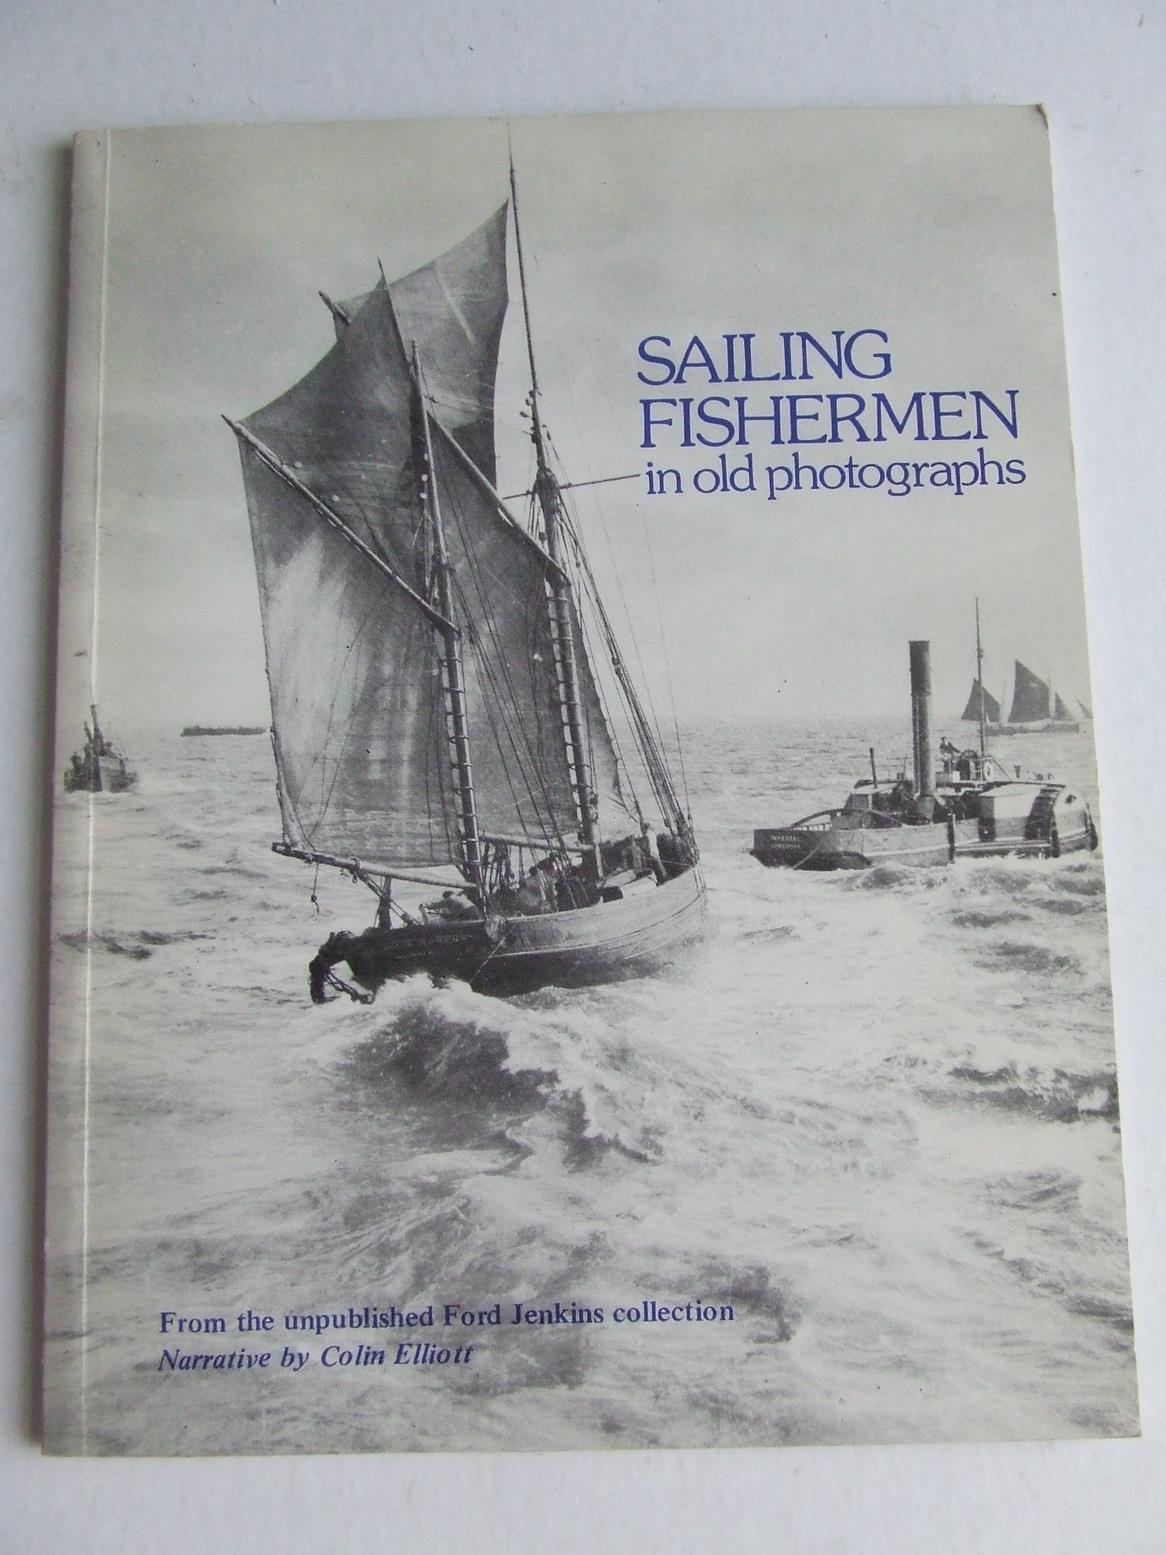 SAILING FISHERMEN IN OLD PHOTOGRAPHS